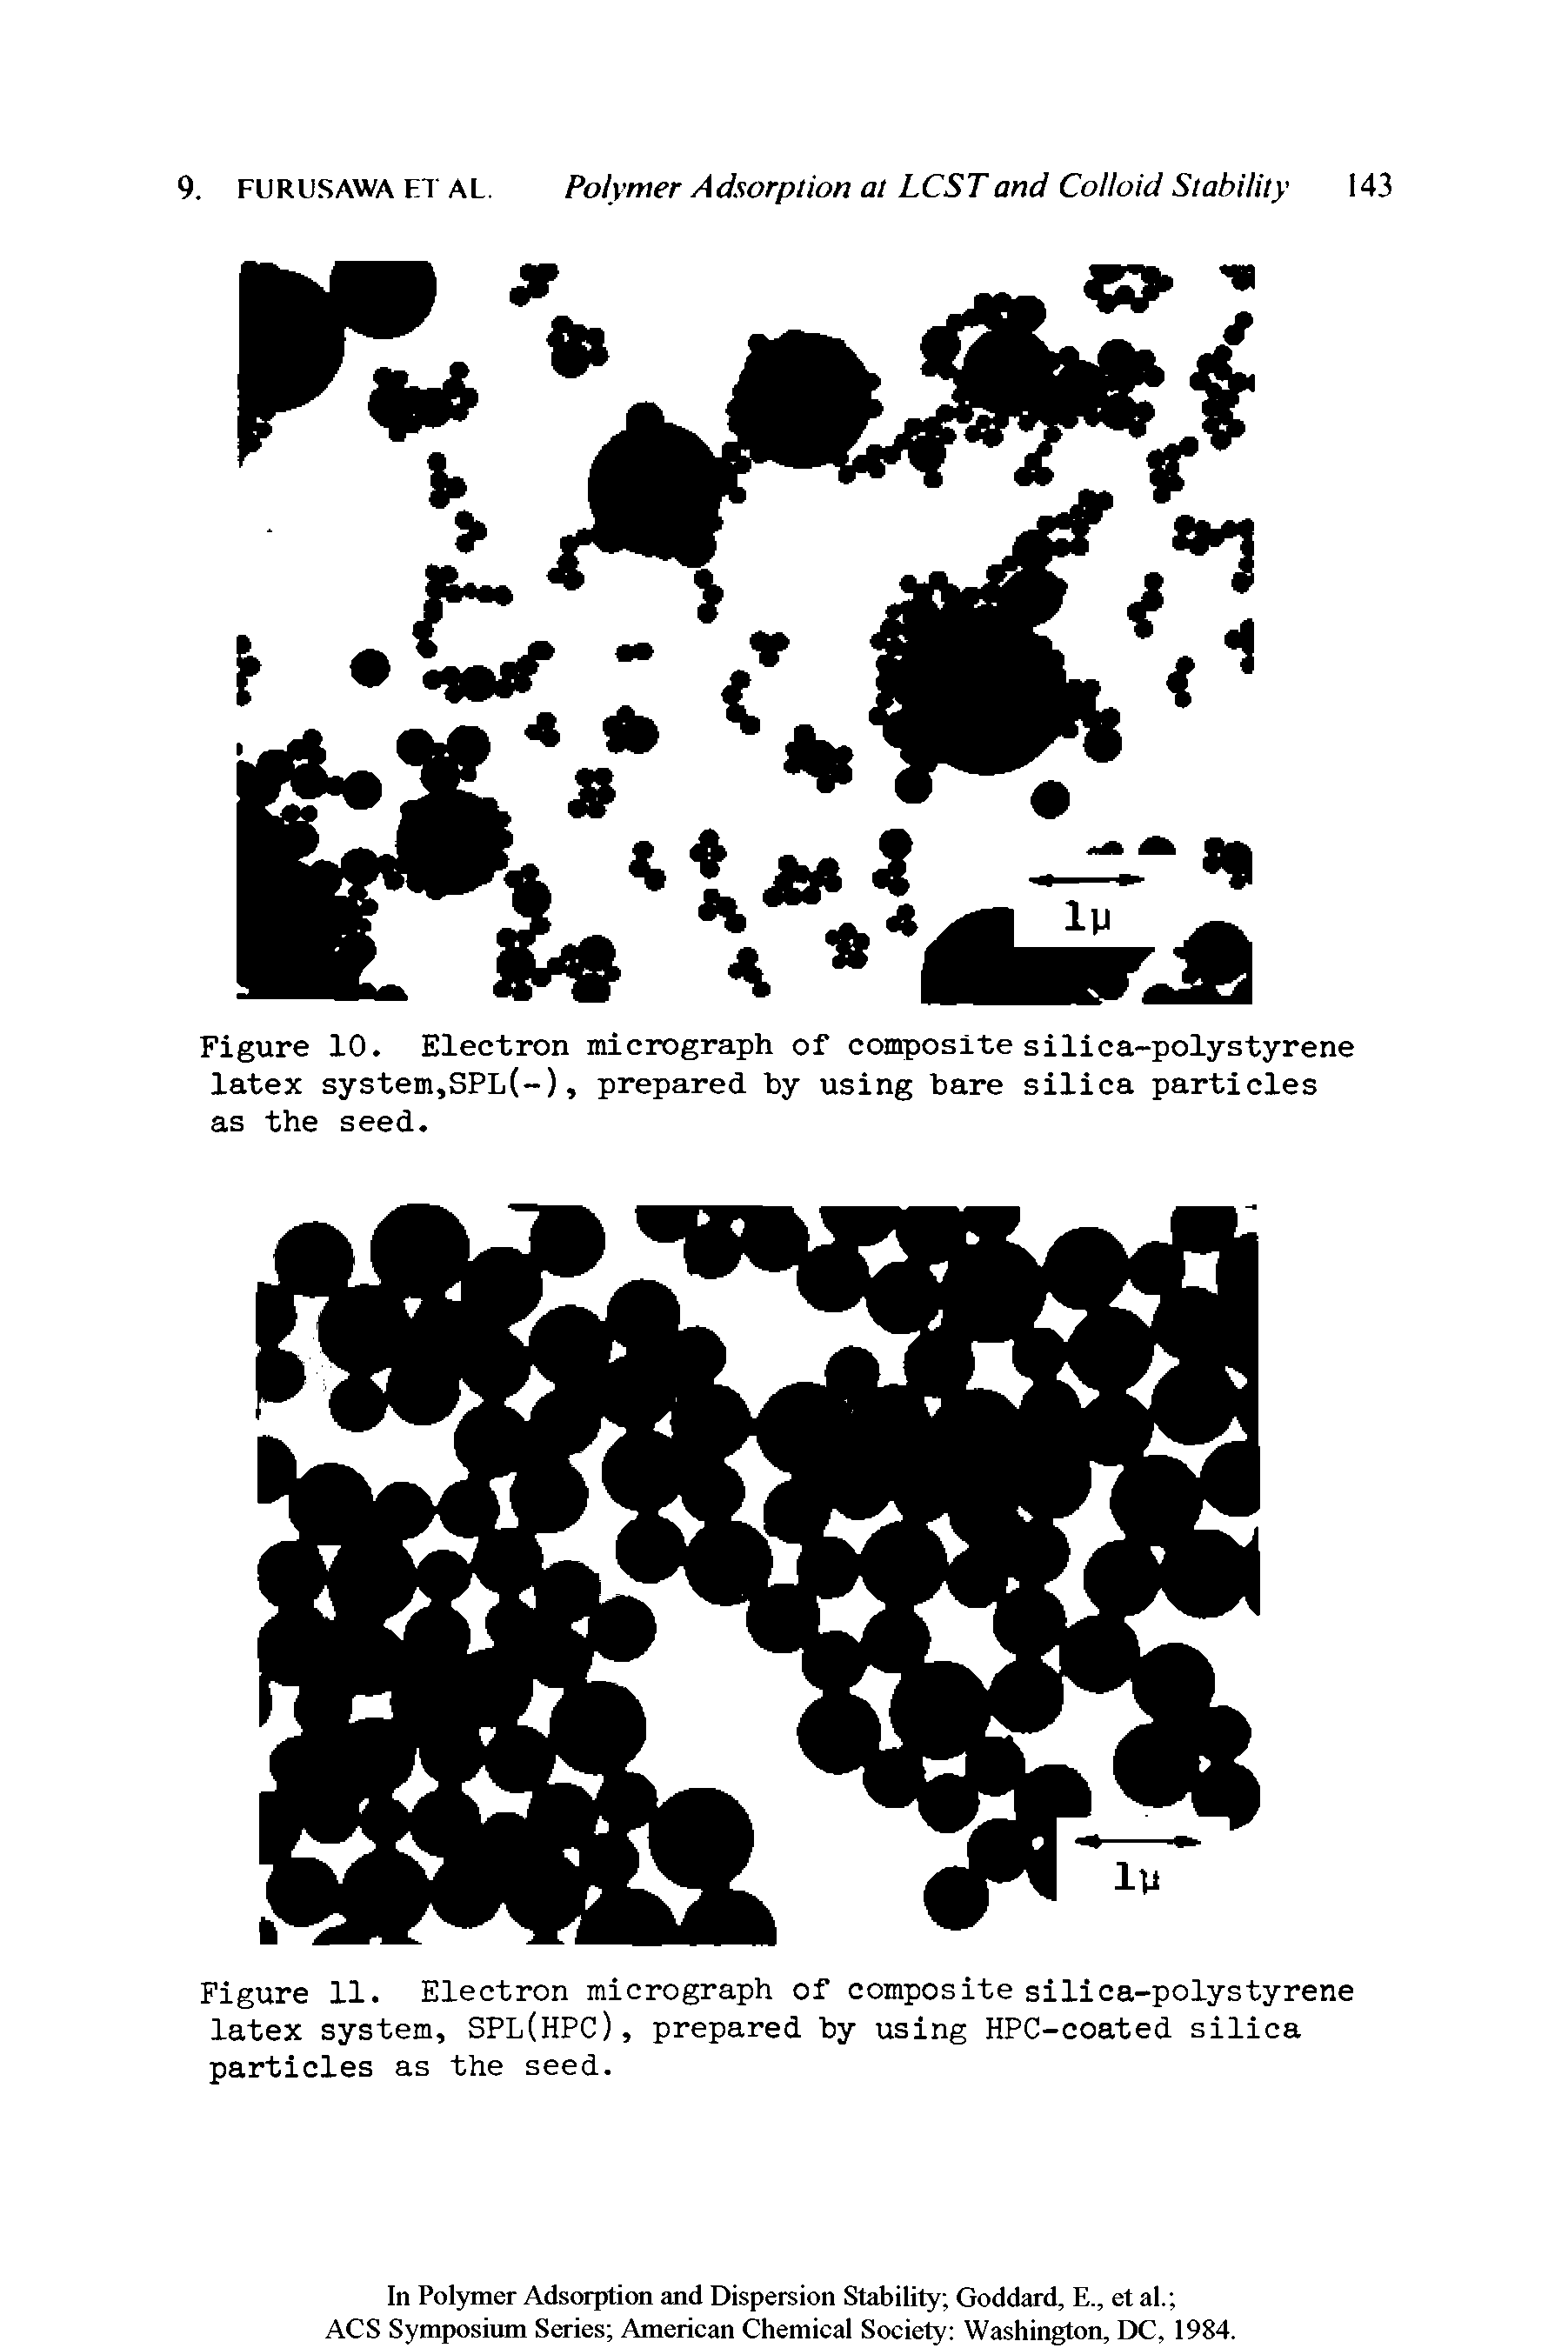 Figure 10. Electron micrograph of composite silica-polystyrene latex system,SPL(-), prepared by using bare silica particles as the seed.